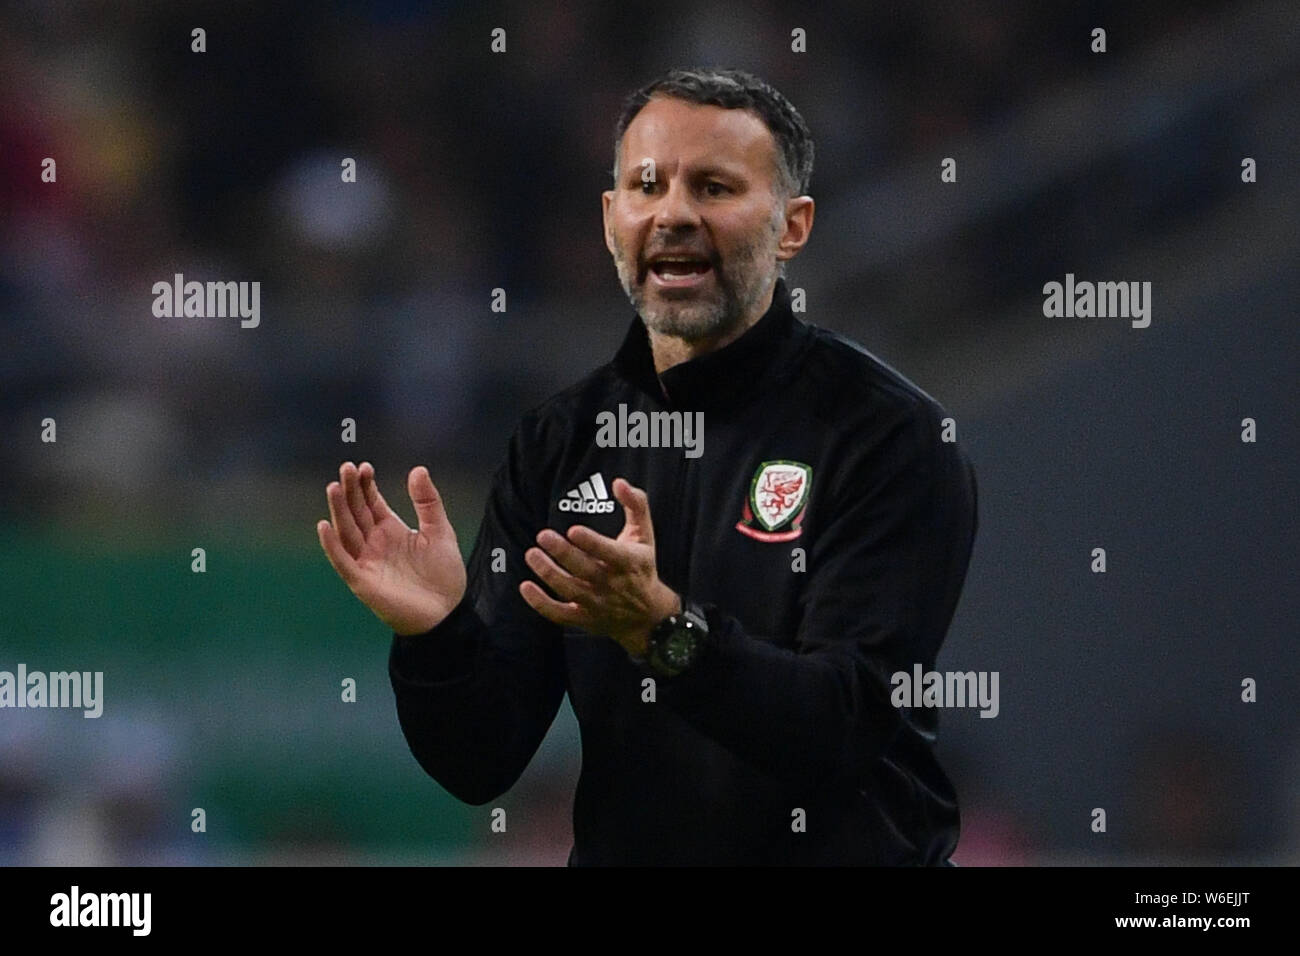 Head coach Ryan Giggs of Wales national football team shouts instructions to his players as they compete against Uruguay national football team in the Stock Photo